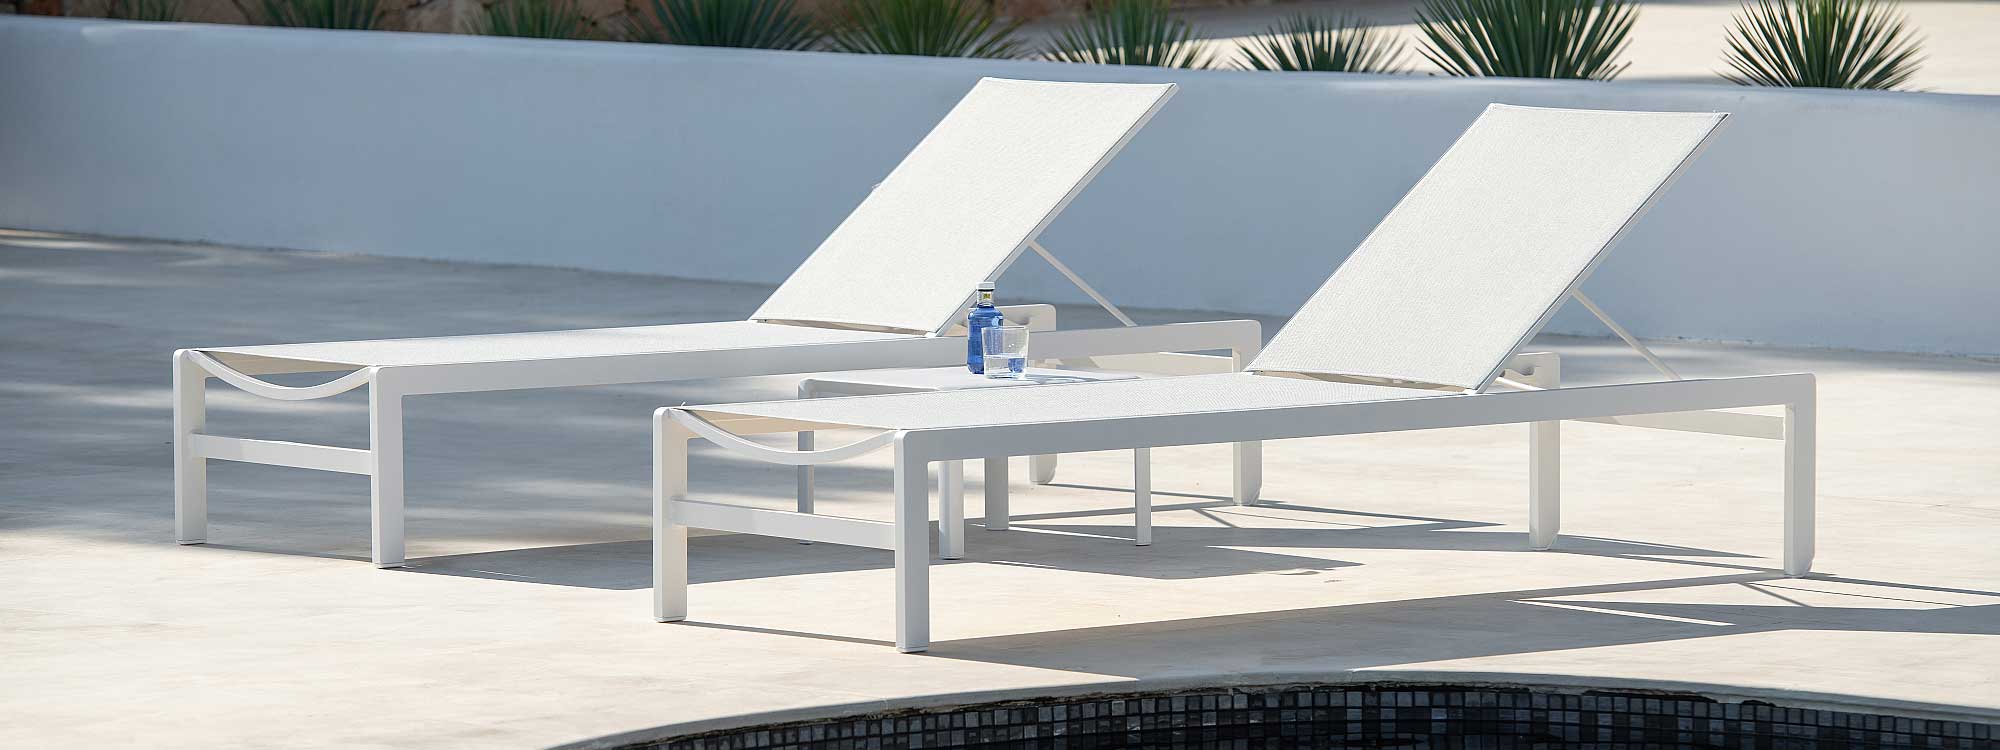 Sylt aluminium sunbed is an adjustable contemporary garden lounger with simple linear design by Jati & Kebon all-weather furniture, Belgium.